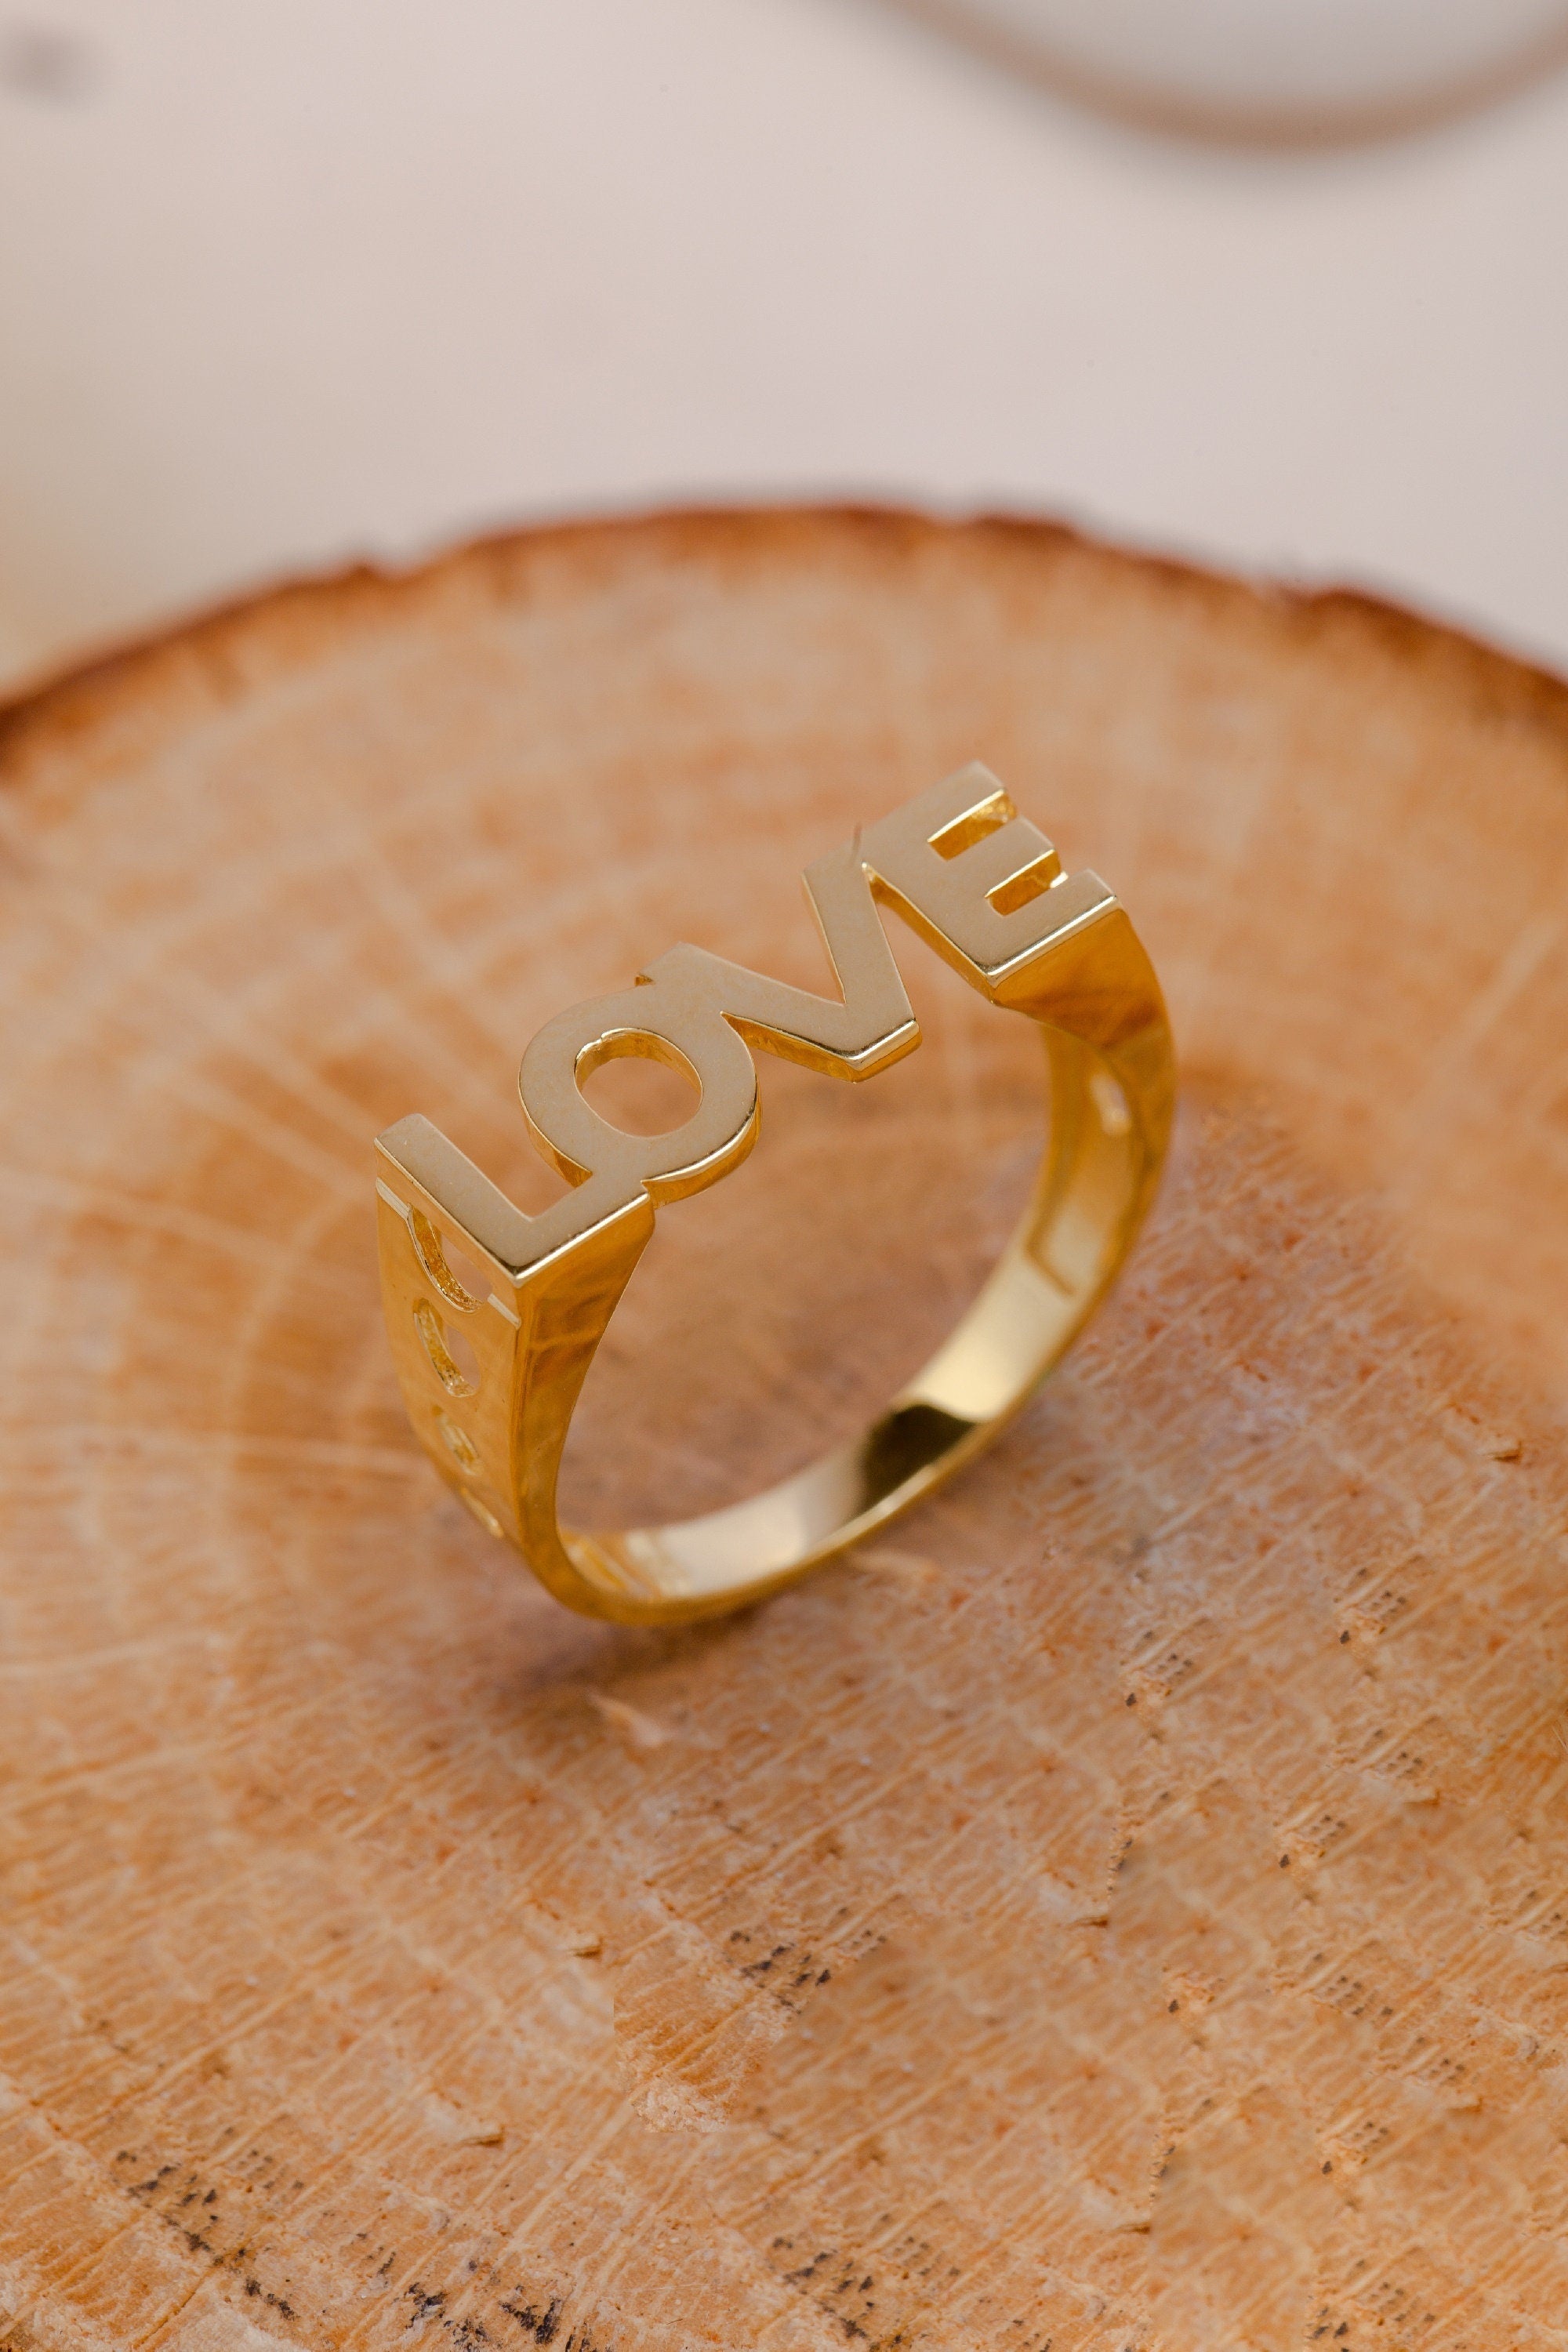 14K Gold Love Wedding Band, Custom Engraved Love Ring, Women's Romantic Ring for Her, 925 Sterling Silver Love Band, Valentine's Day Gift